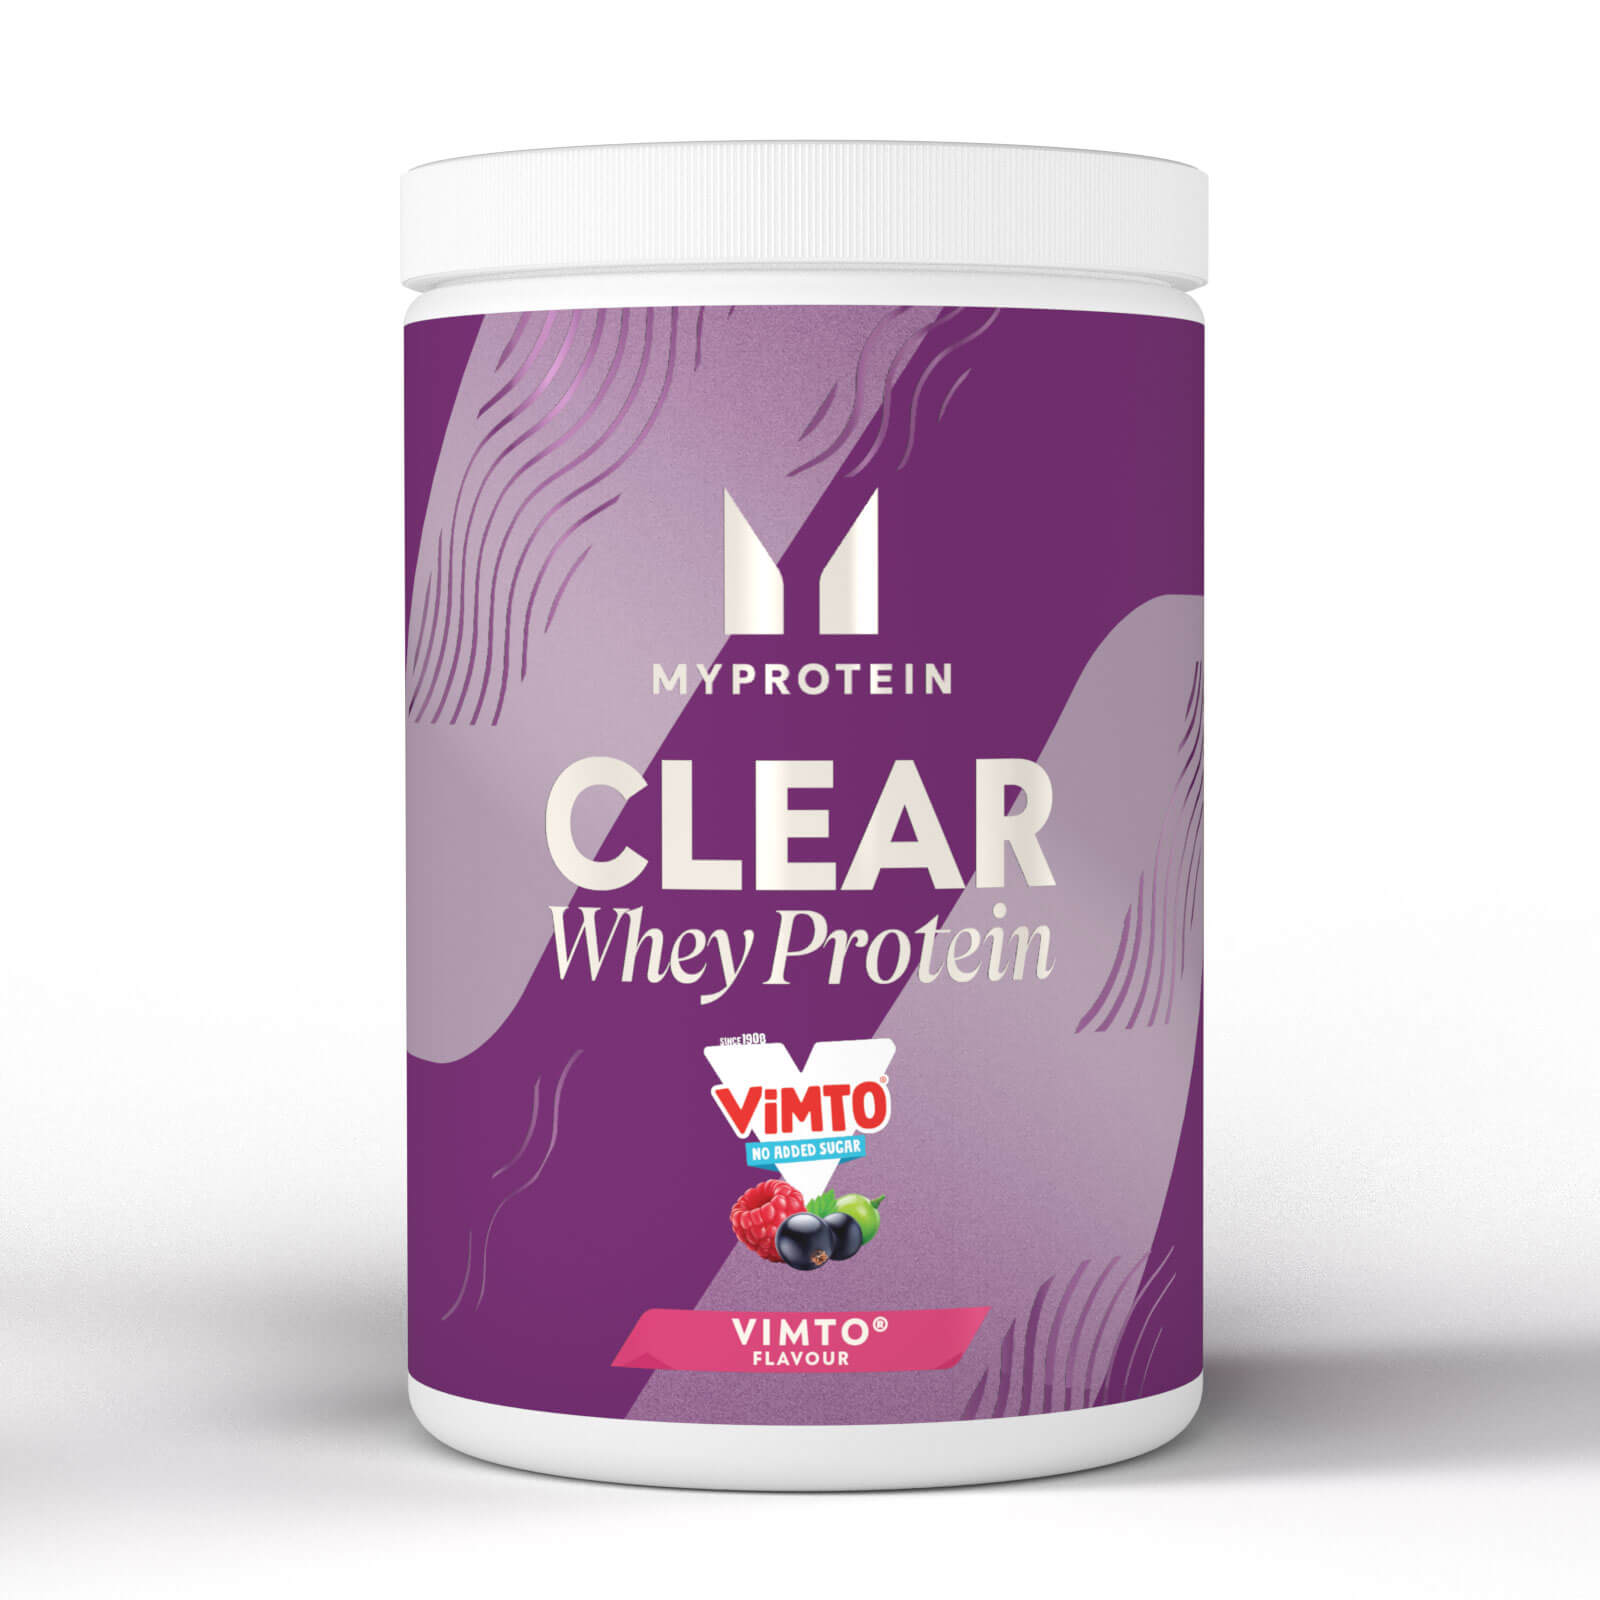 Clear Whey Protein - Vimto(r)